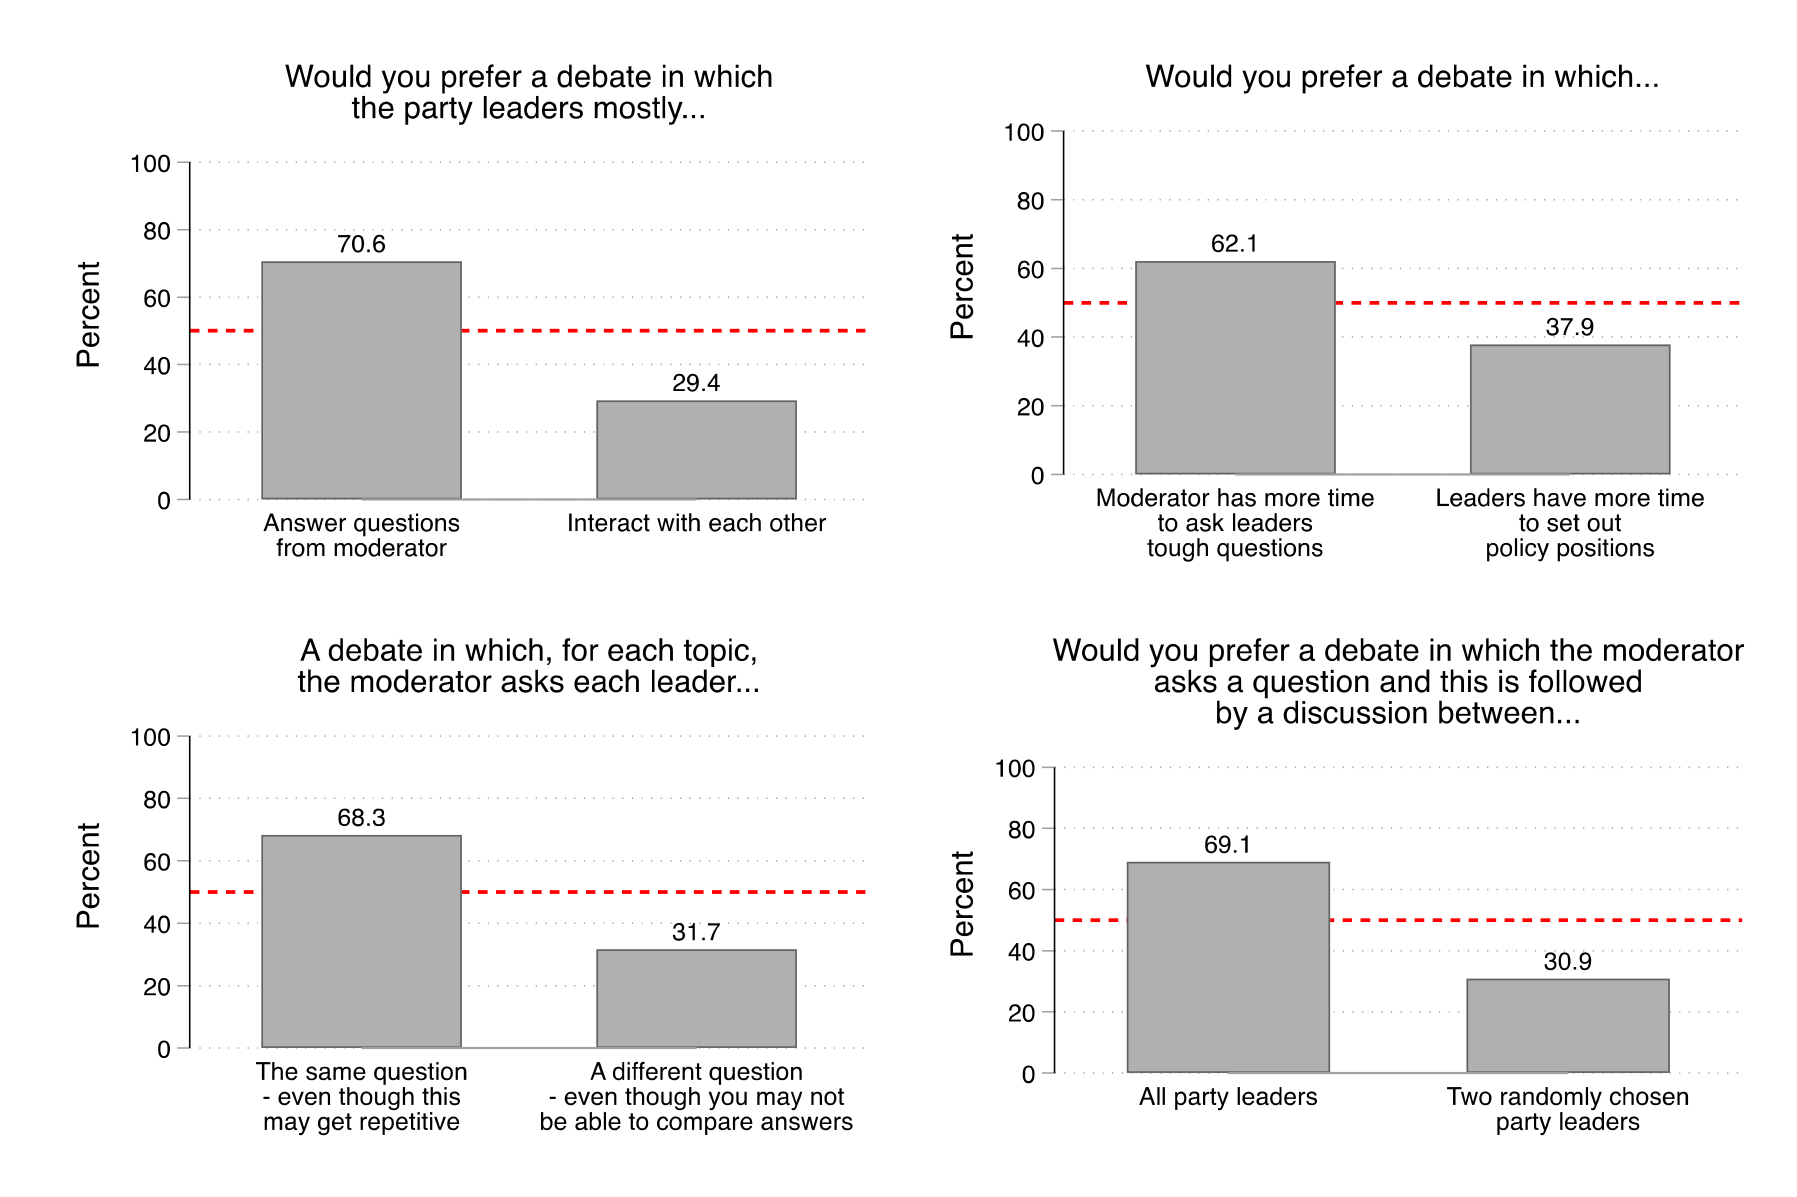 Figure 37. This figure shows participants' binary preferences regarding debate format. For example, 71% of participants favoured a debate in which the leaders mostly answered questions from the moderator to a debate where the leaders mostly interacted with each other.